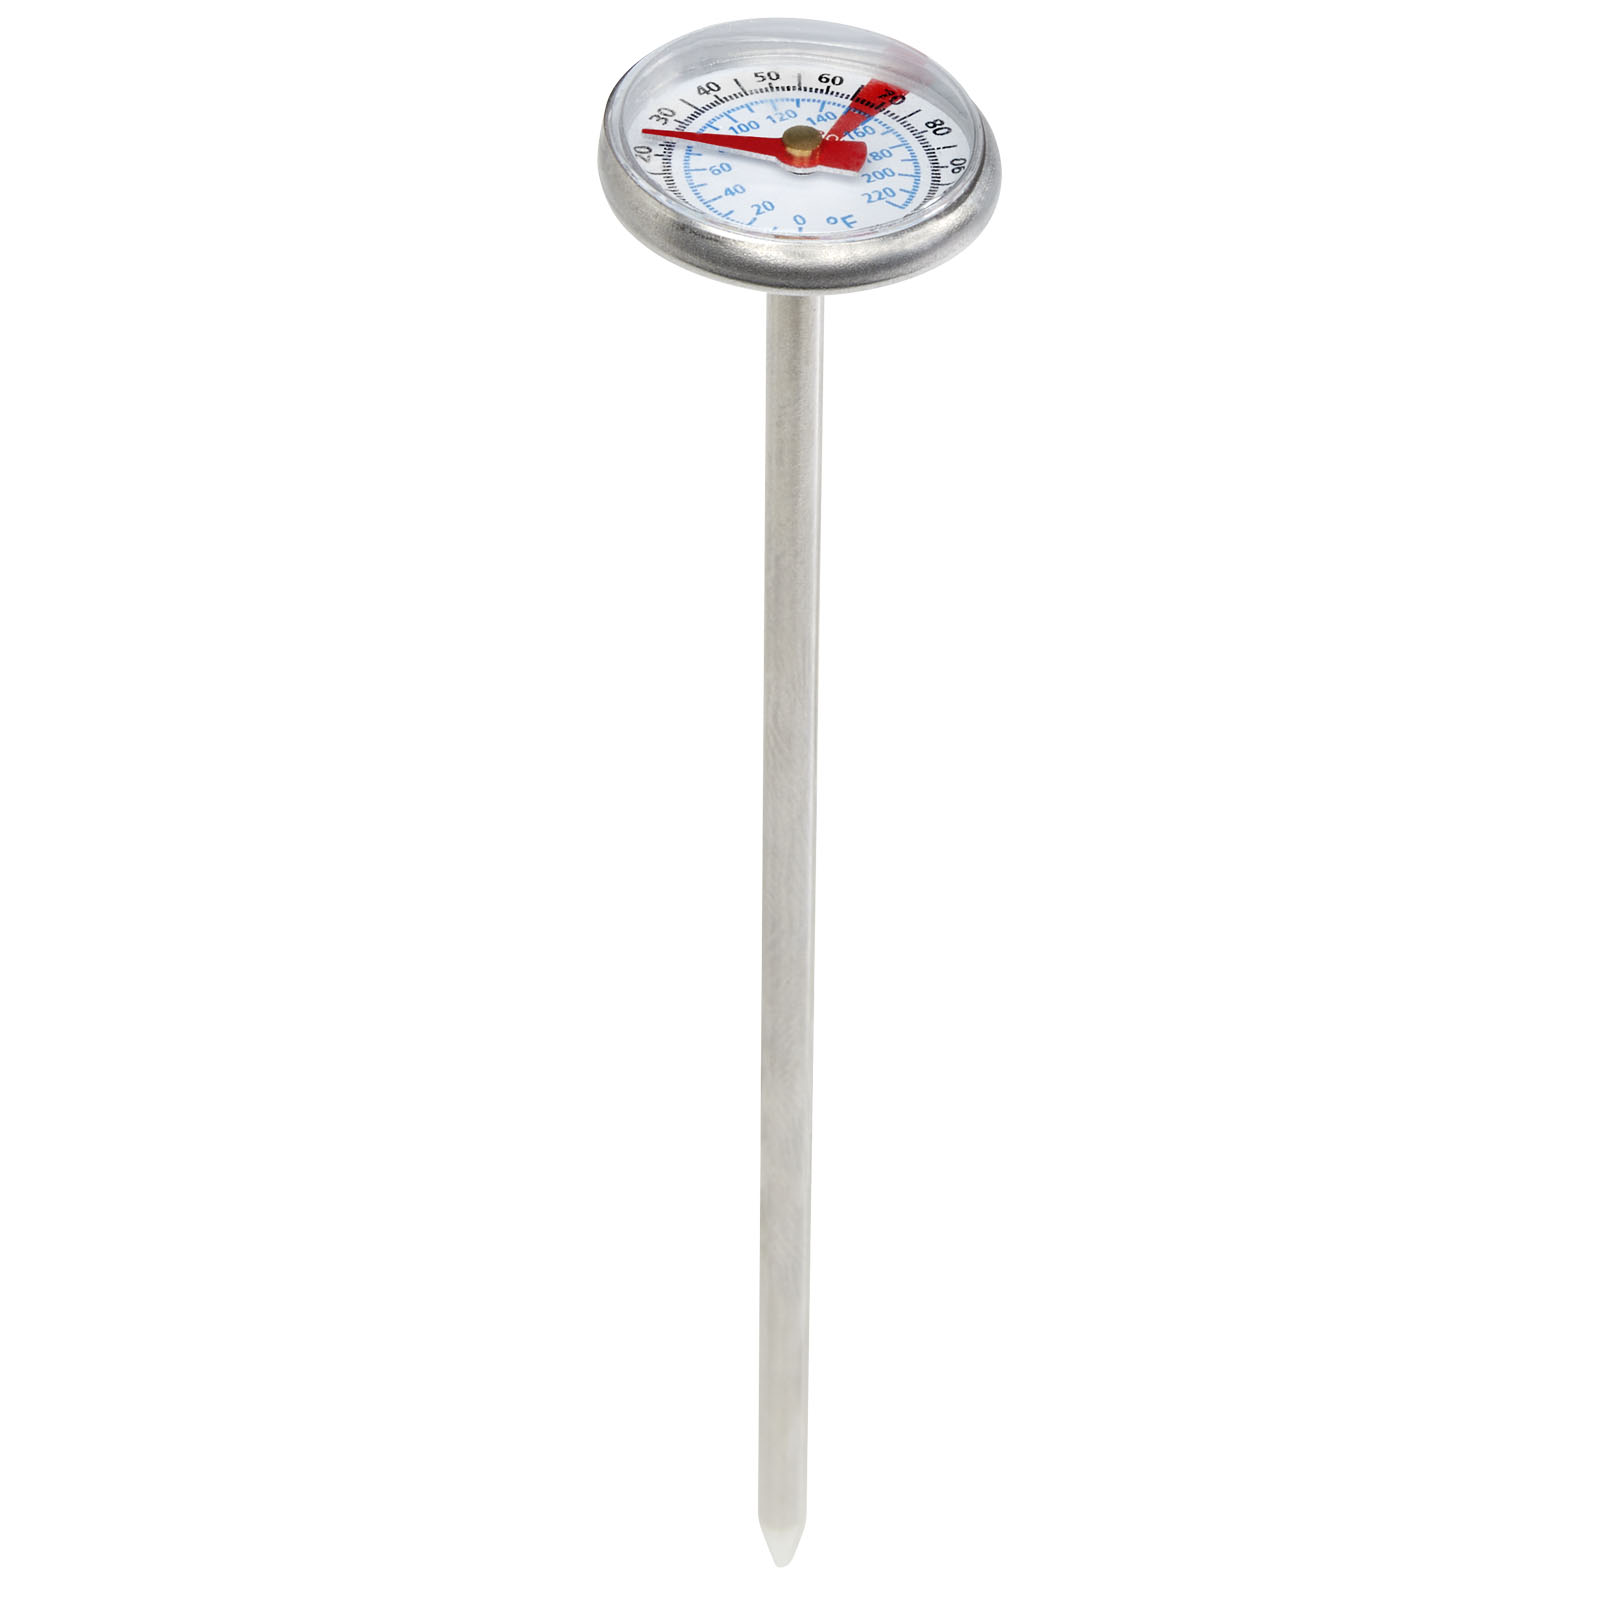 Sports & Leisure - Met BBQ thermomether